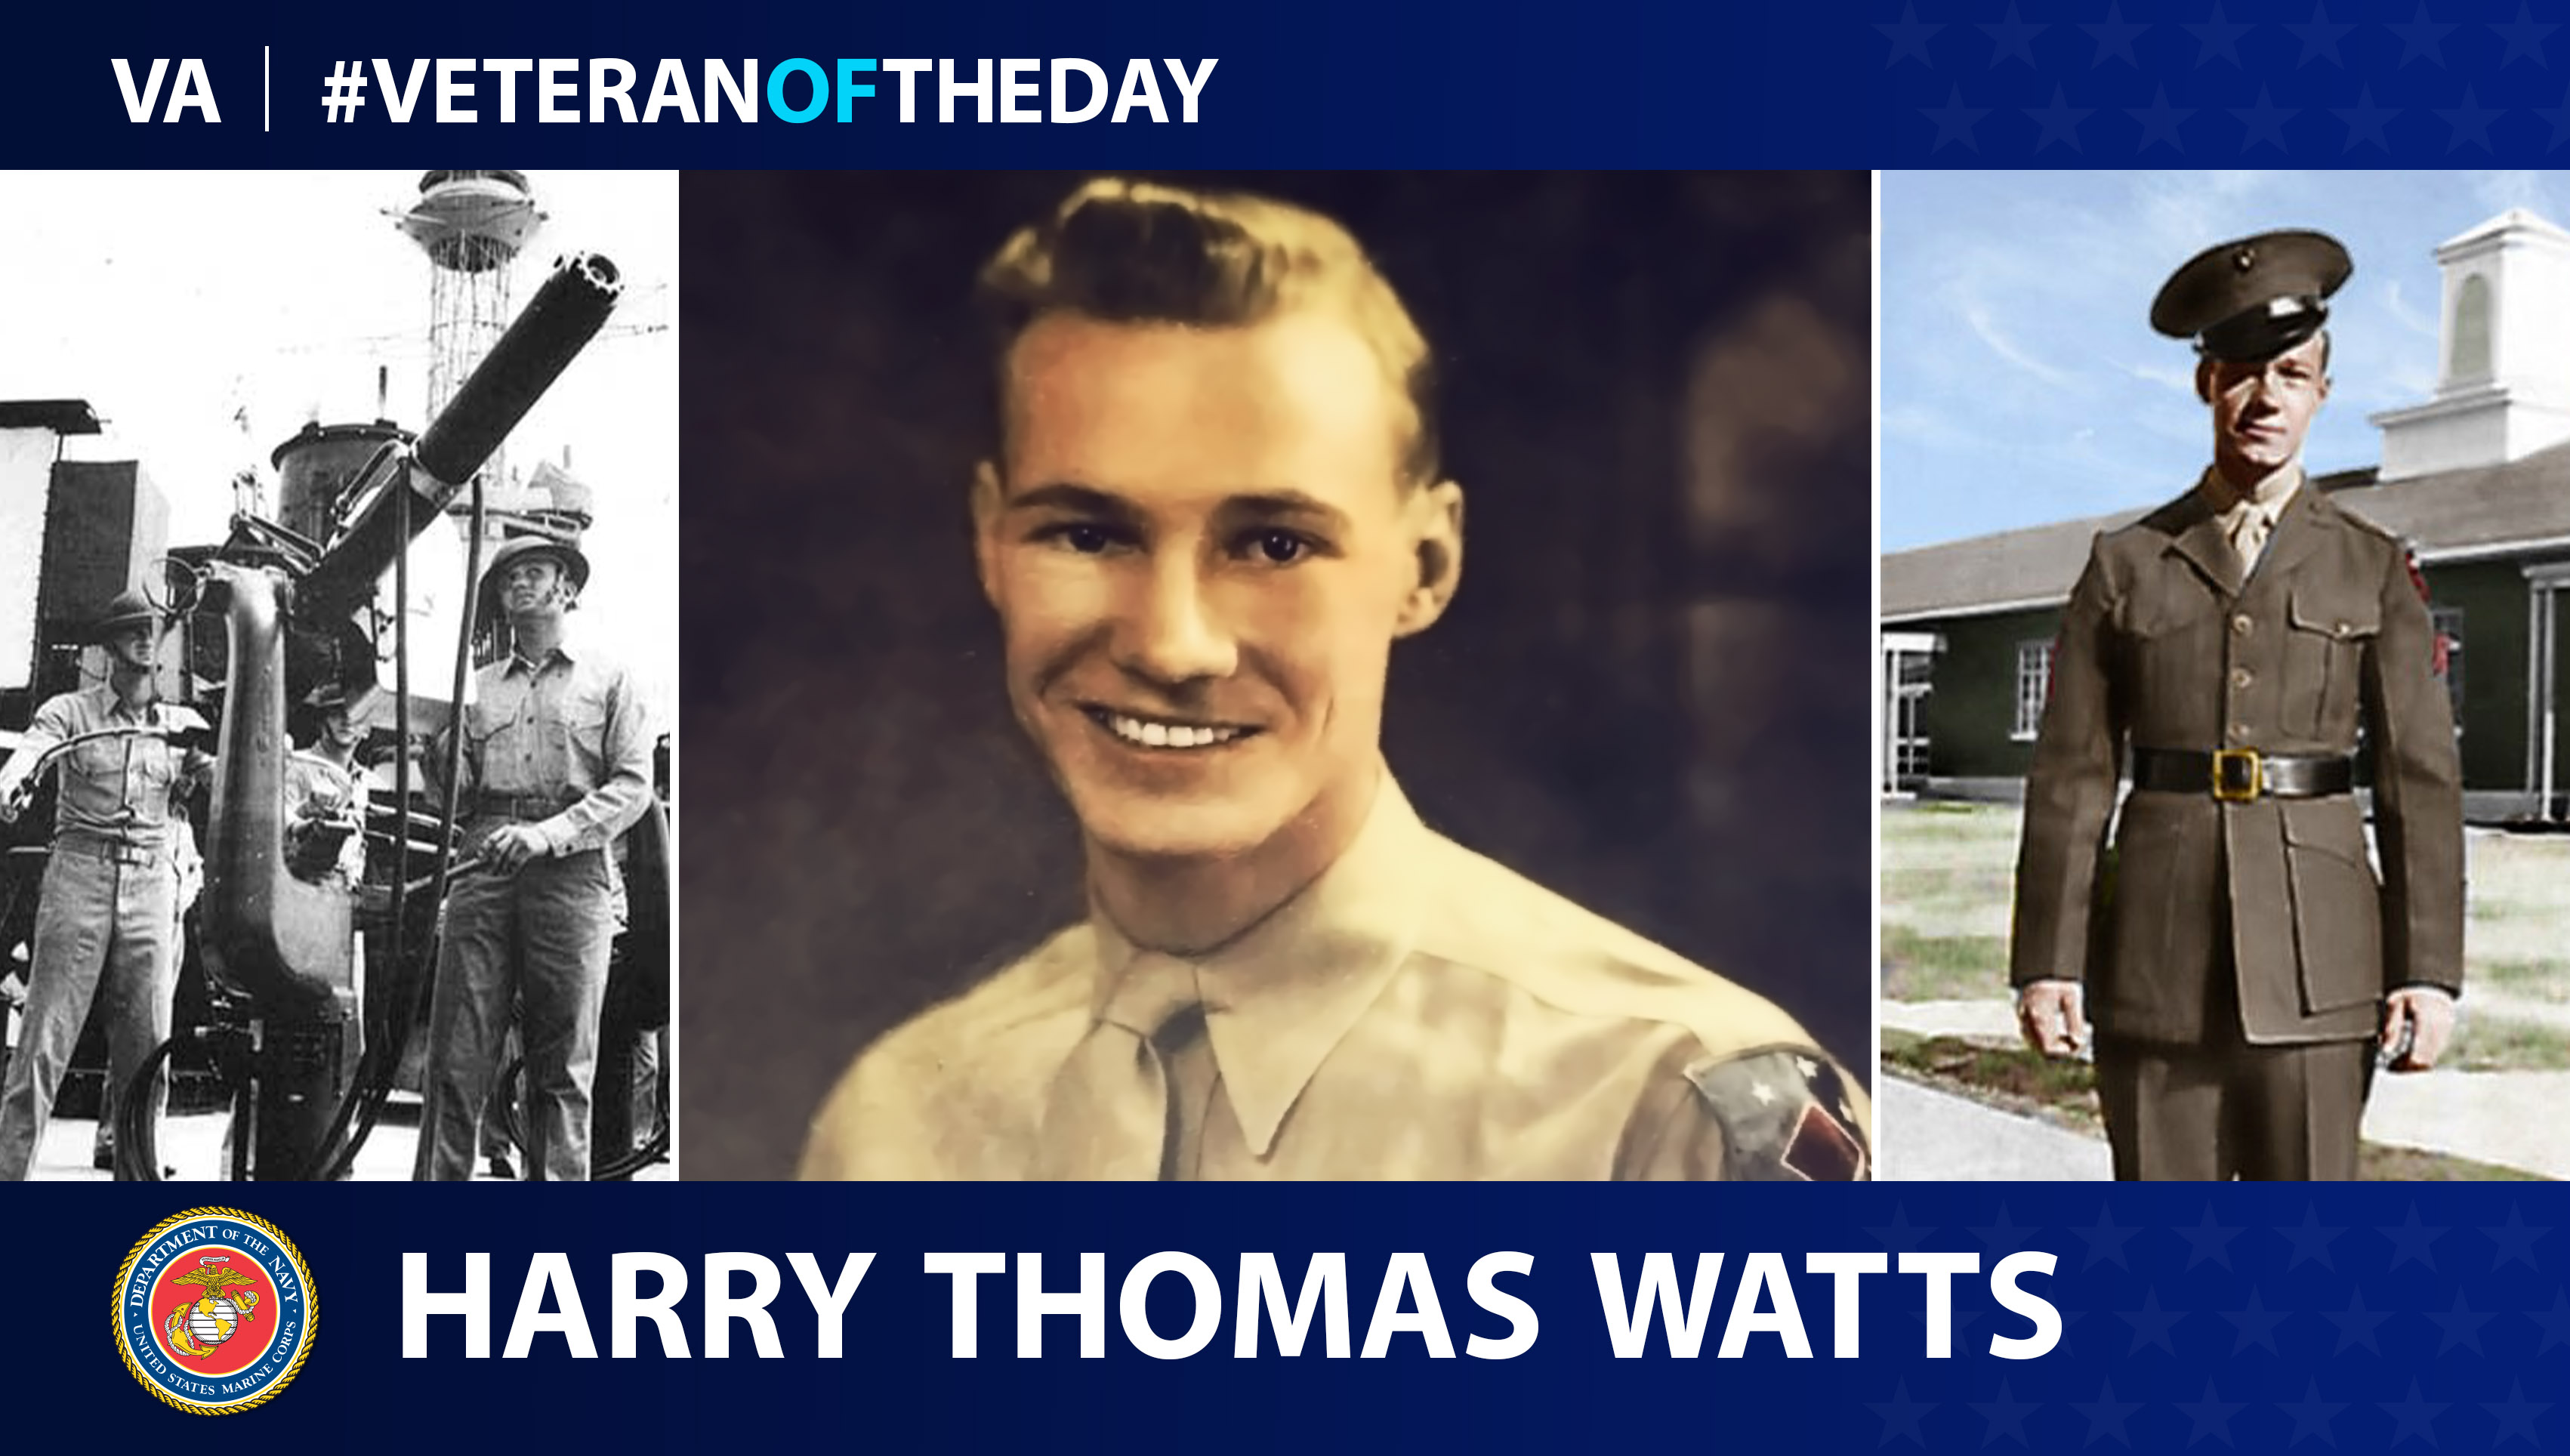 Harry Watts is today's Veteran of the Day.